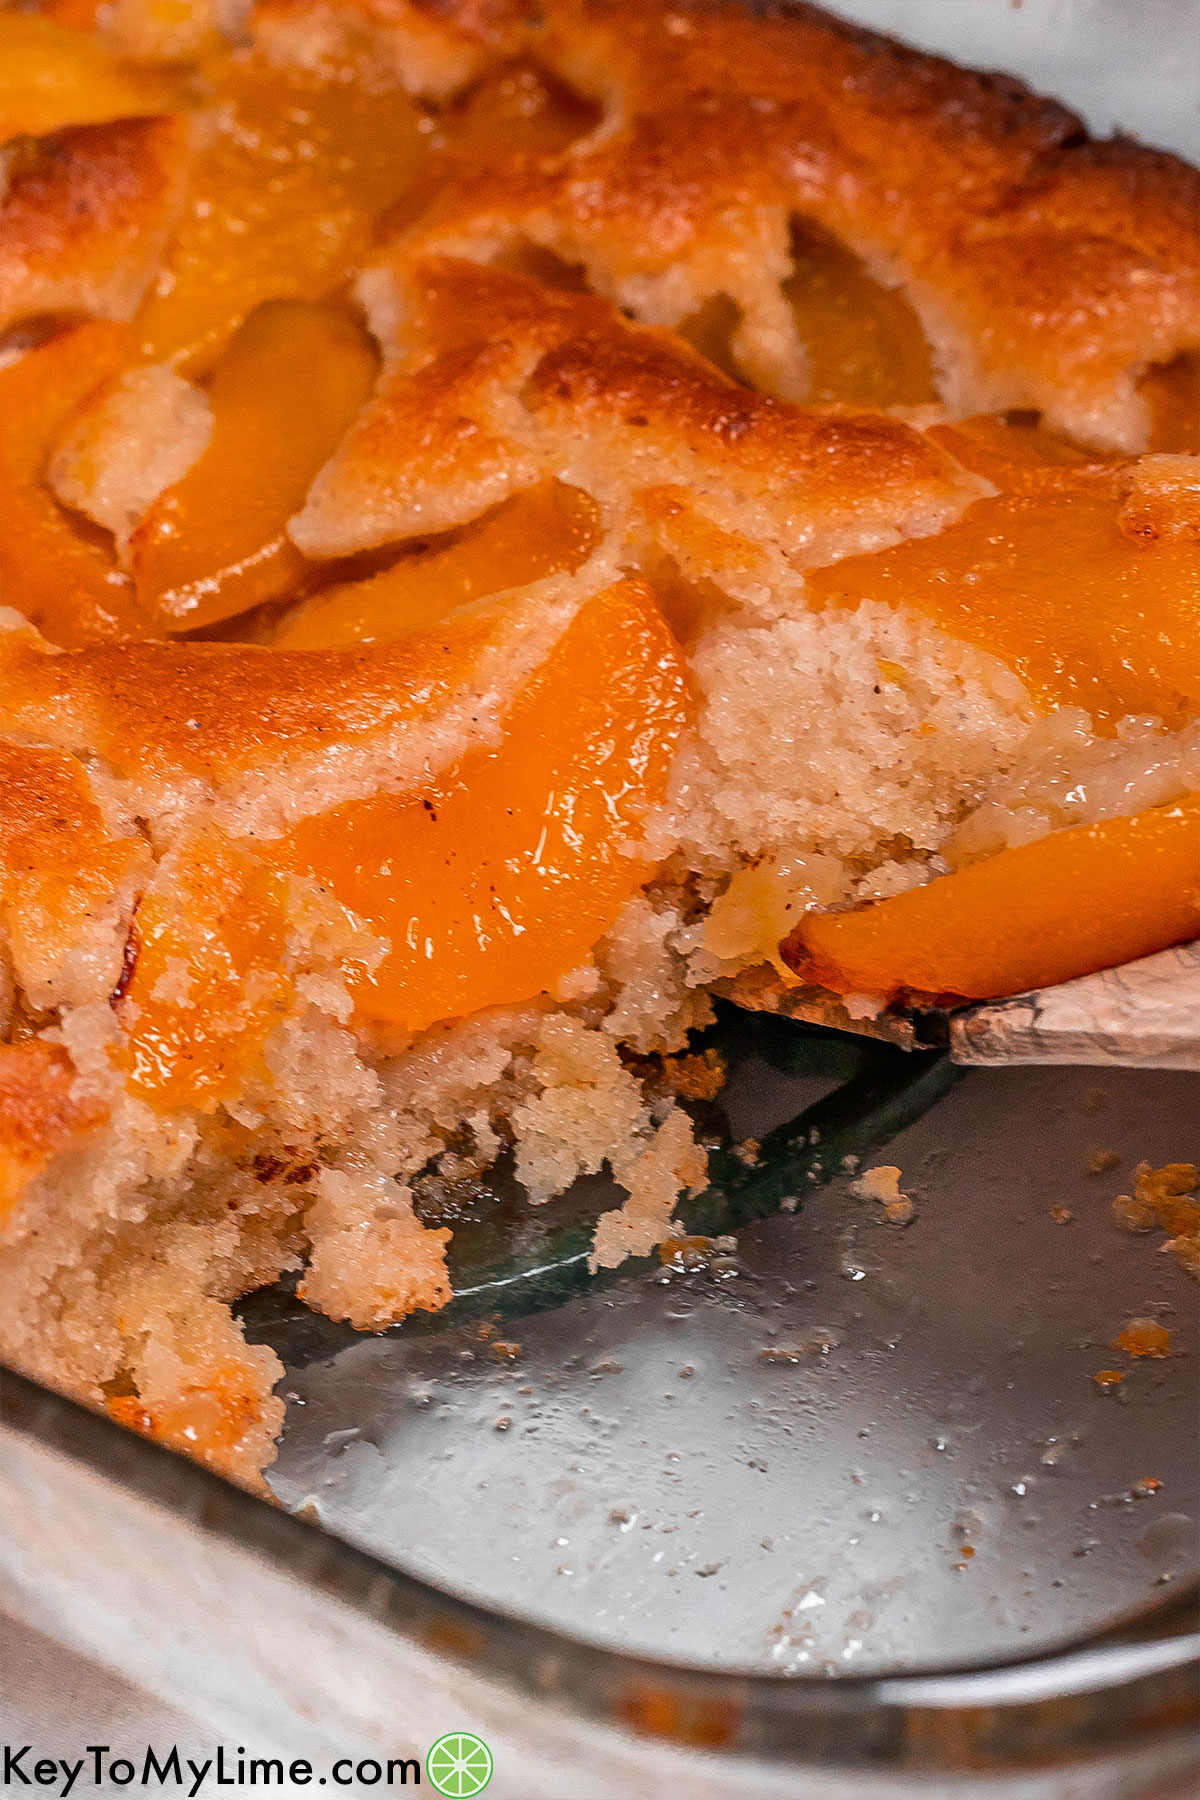 A close up shot showing the inside texture of the cobbler.